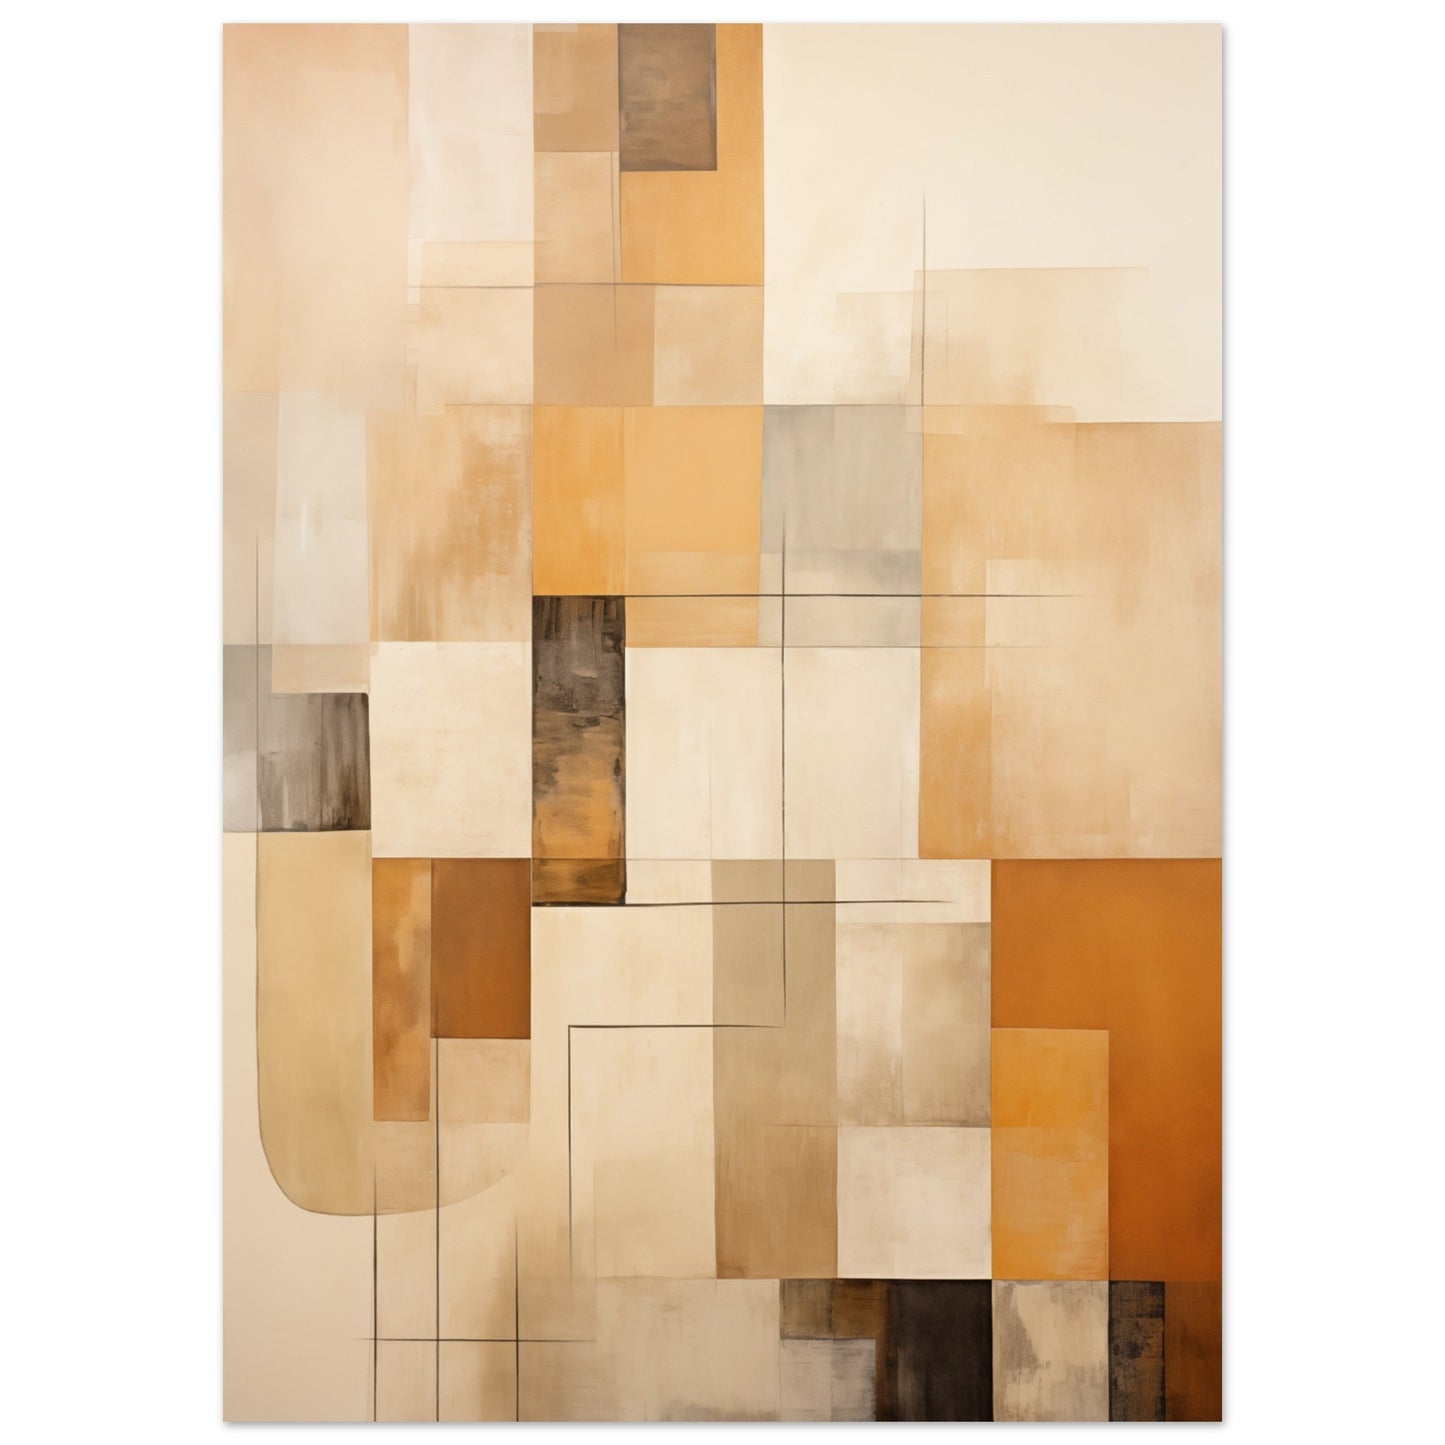 A brown and beige Abstract Art painting called "Lines in Sand", perfect for poster wall art or as colored wall art to decorate any room.